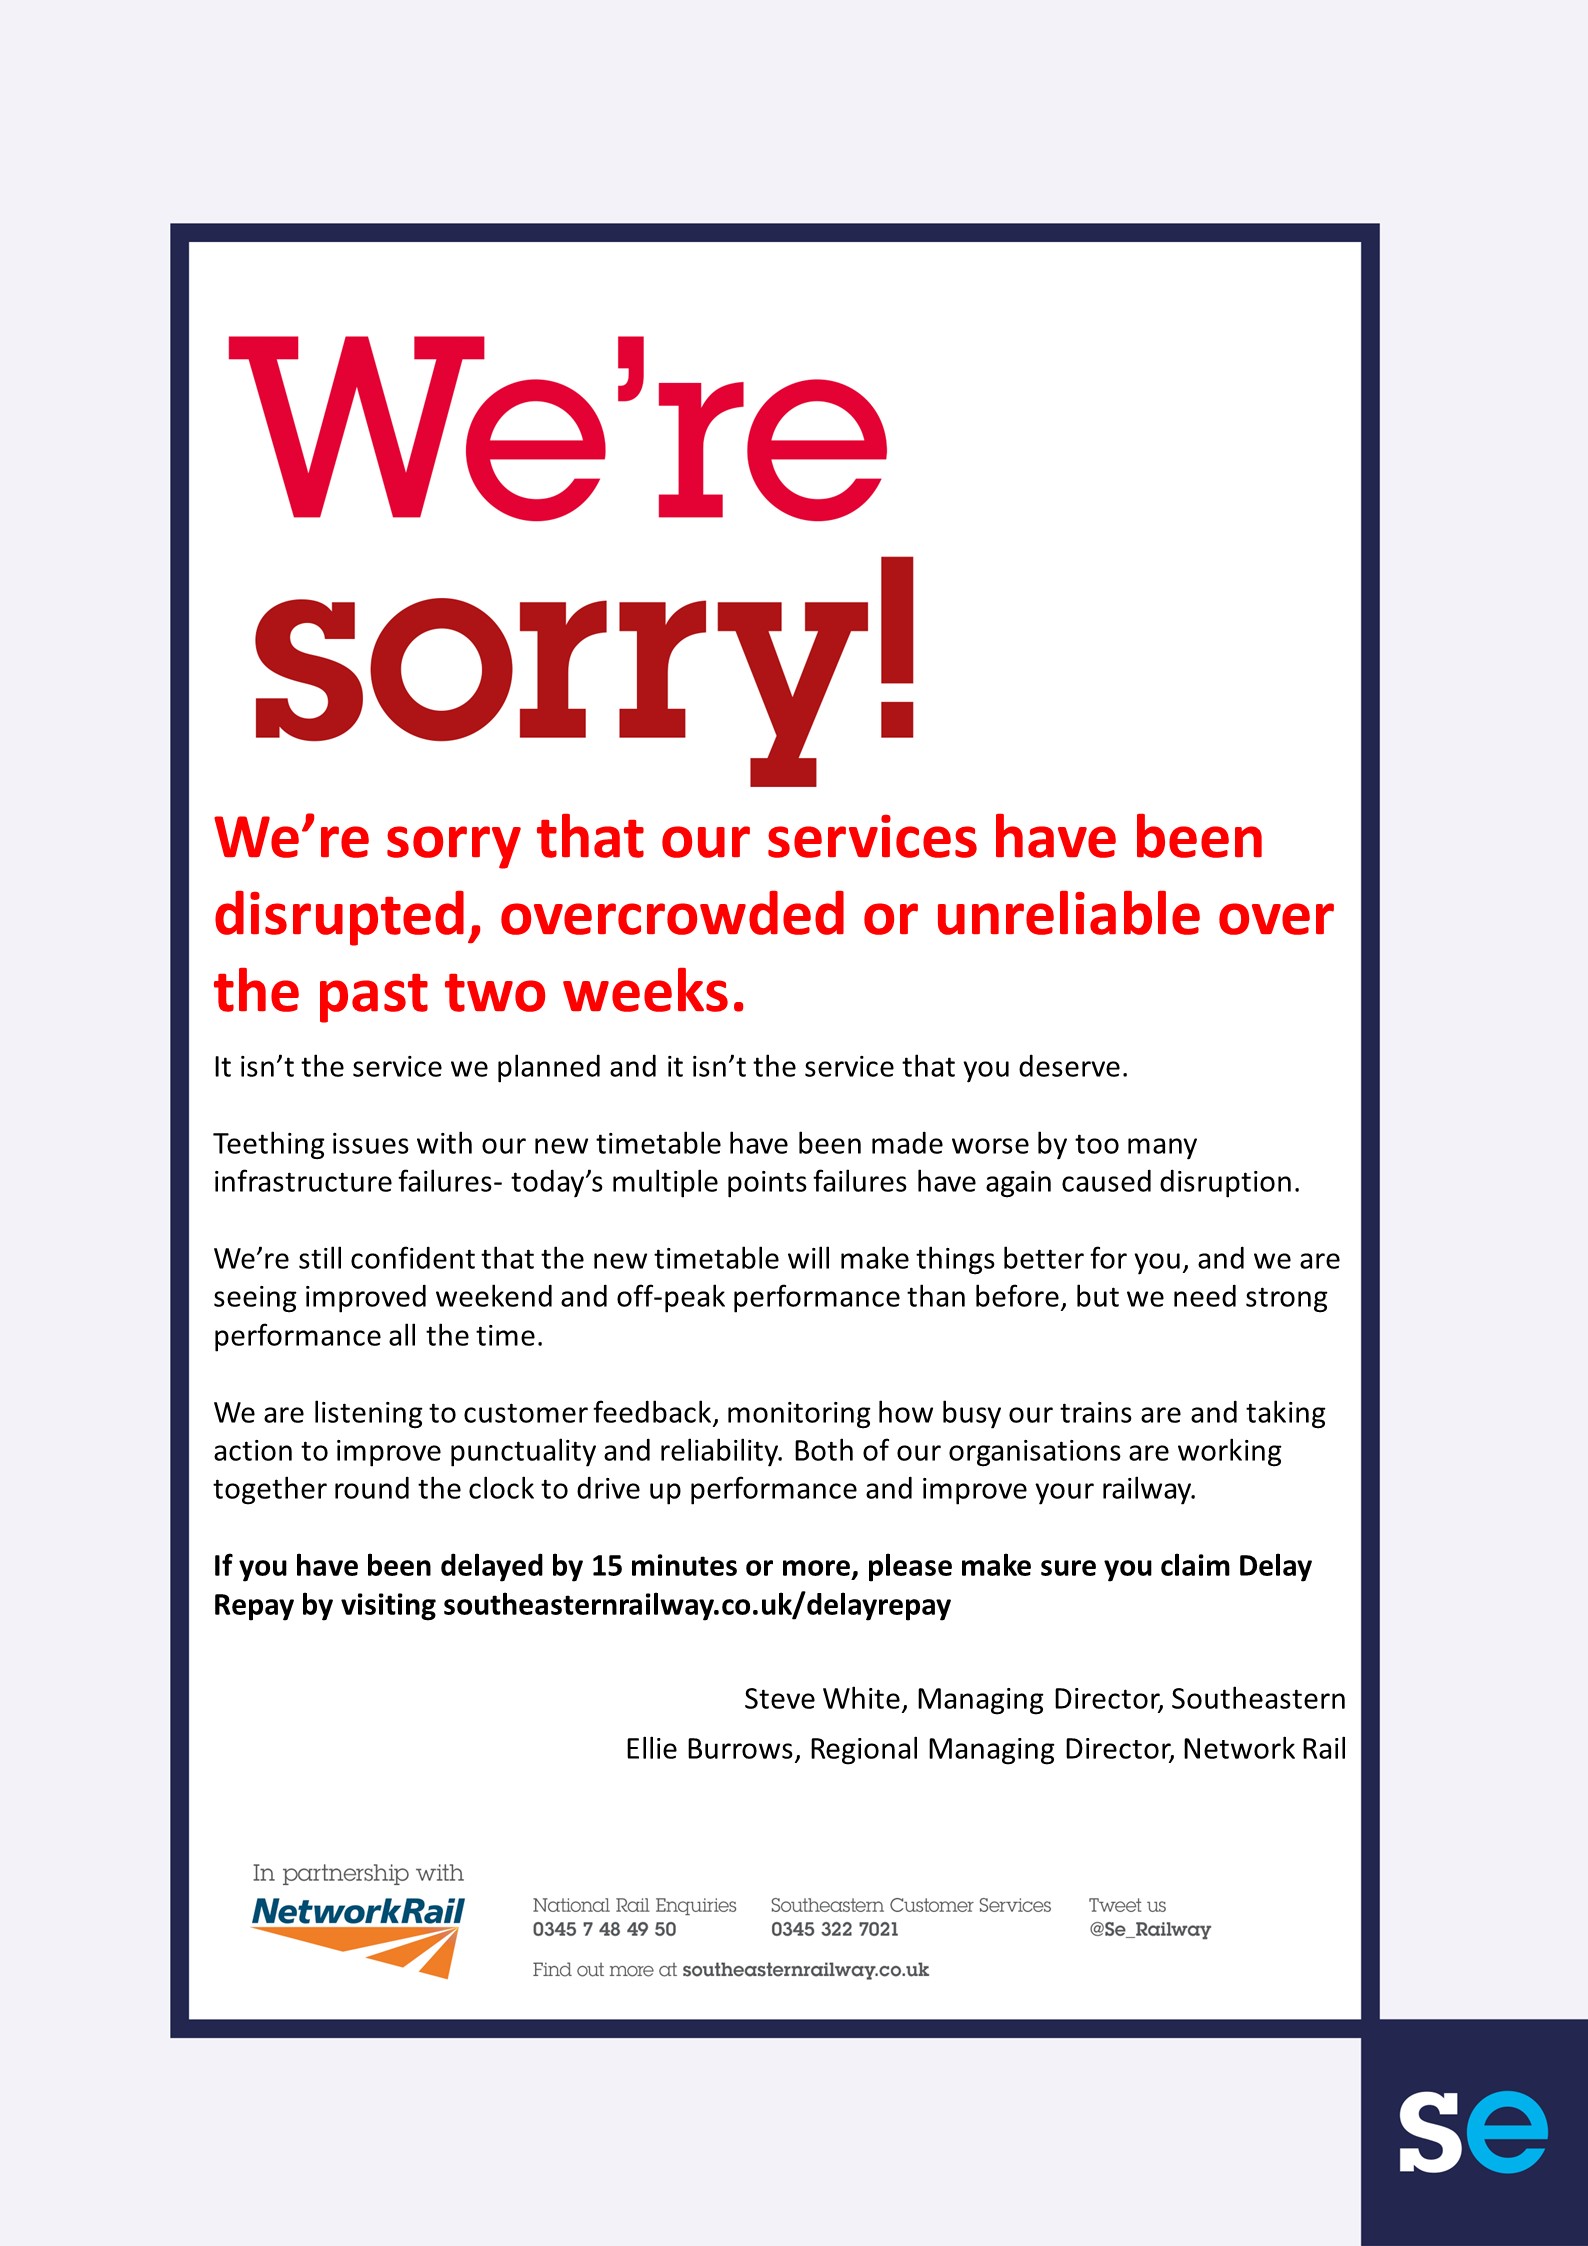 Were sorry that our services have been disrupted overcrowded or unreliable over the past two weeksIt isnt the service we planned and it isnt the service that you deserve Teething issues with our new timetable have been made worse by too many infrastructure failures- todays multiple points failures have again caused disruptionWere still confident that the new timetable will make things better for you and we are seeing improved weekend and off-peak performance than before but we need strong performance all the time  We are listening to customer feedback monitoring how busy our trains are and taking action to improve punctuality and reliability Both of our organisations are working together round the clock to drive up performance and improve your railway  If you have been delayed by 15 minutes or more please make sure you claim Delay Repay by visiting southeasternrailwaycoukdelayrepaySteve White Managing Director SoutheasternEllie Burrows Regional Mana